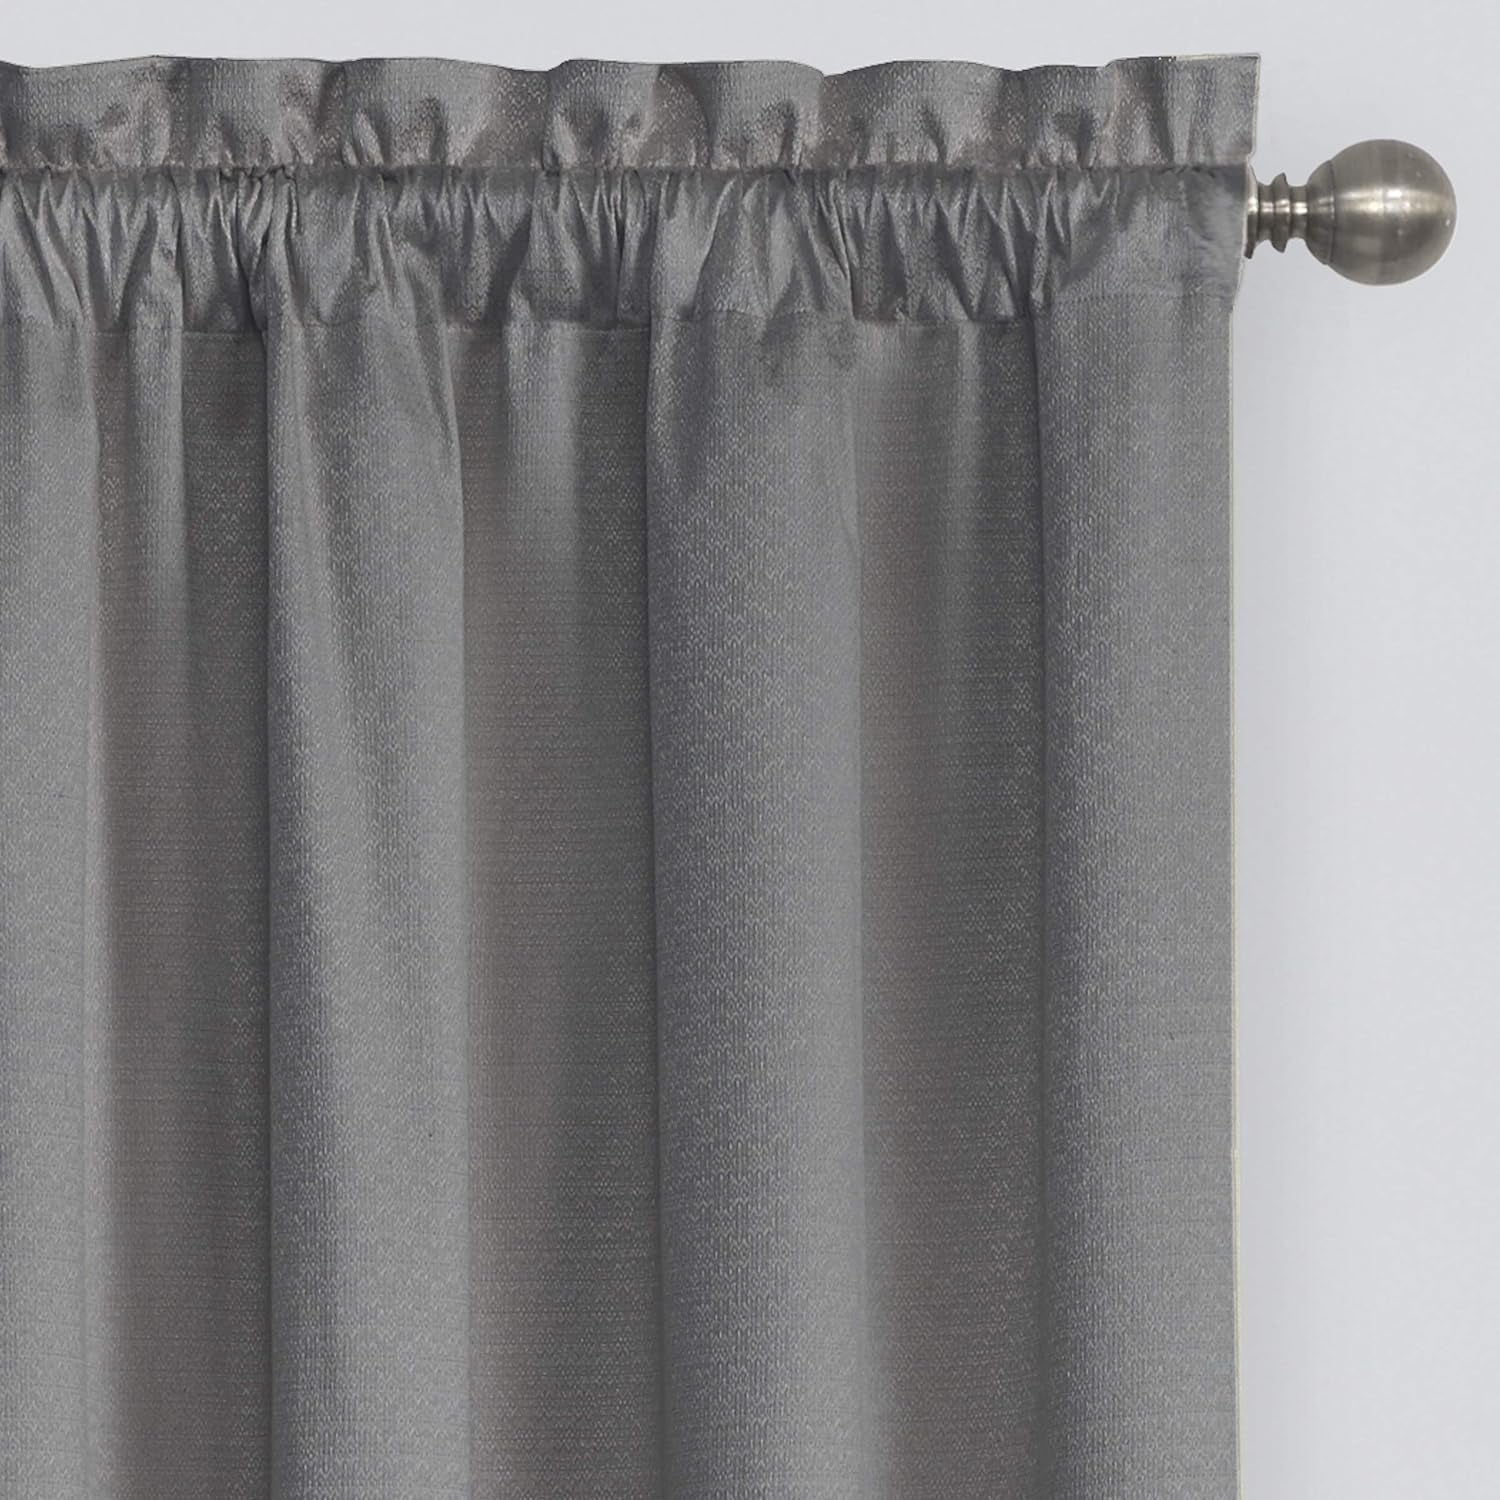 ECLIPSE Canova Blackout Thermaback Window Valance Curtains for Kitchen or Bathroom, 42 in X 21 In, Charcoal